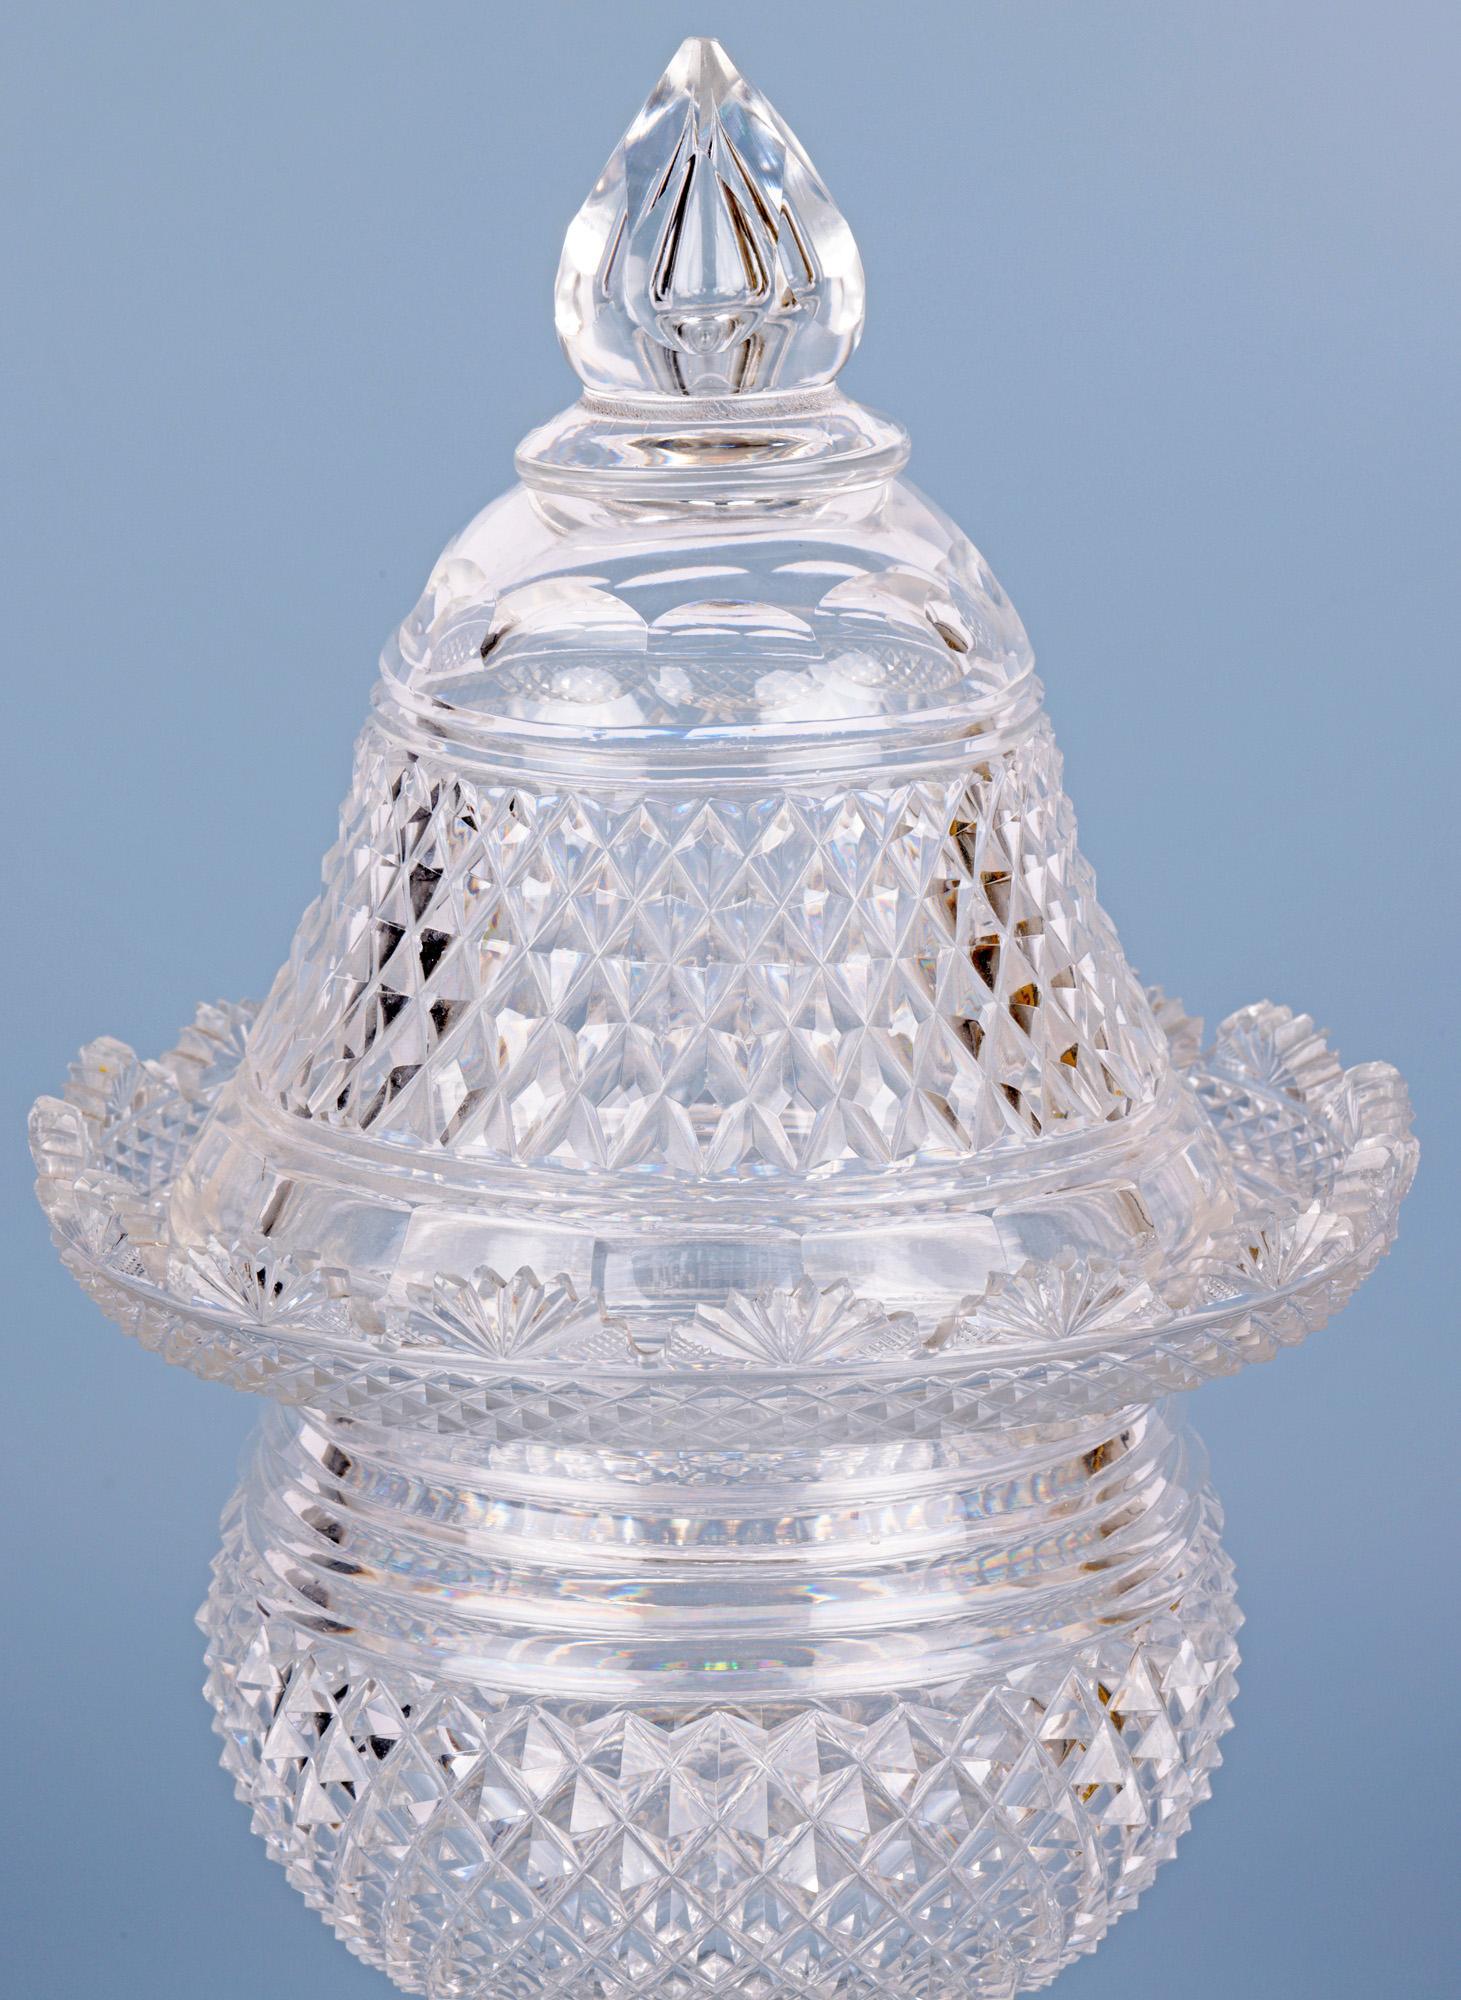 A very fine antique cut glass jar and matching cover dating from around 1825. The jar stands on a thick square star cut based foot with a narrow slice cut stem and round bulbous body with diamond and prism cut patterning with an ornate wide cut